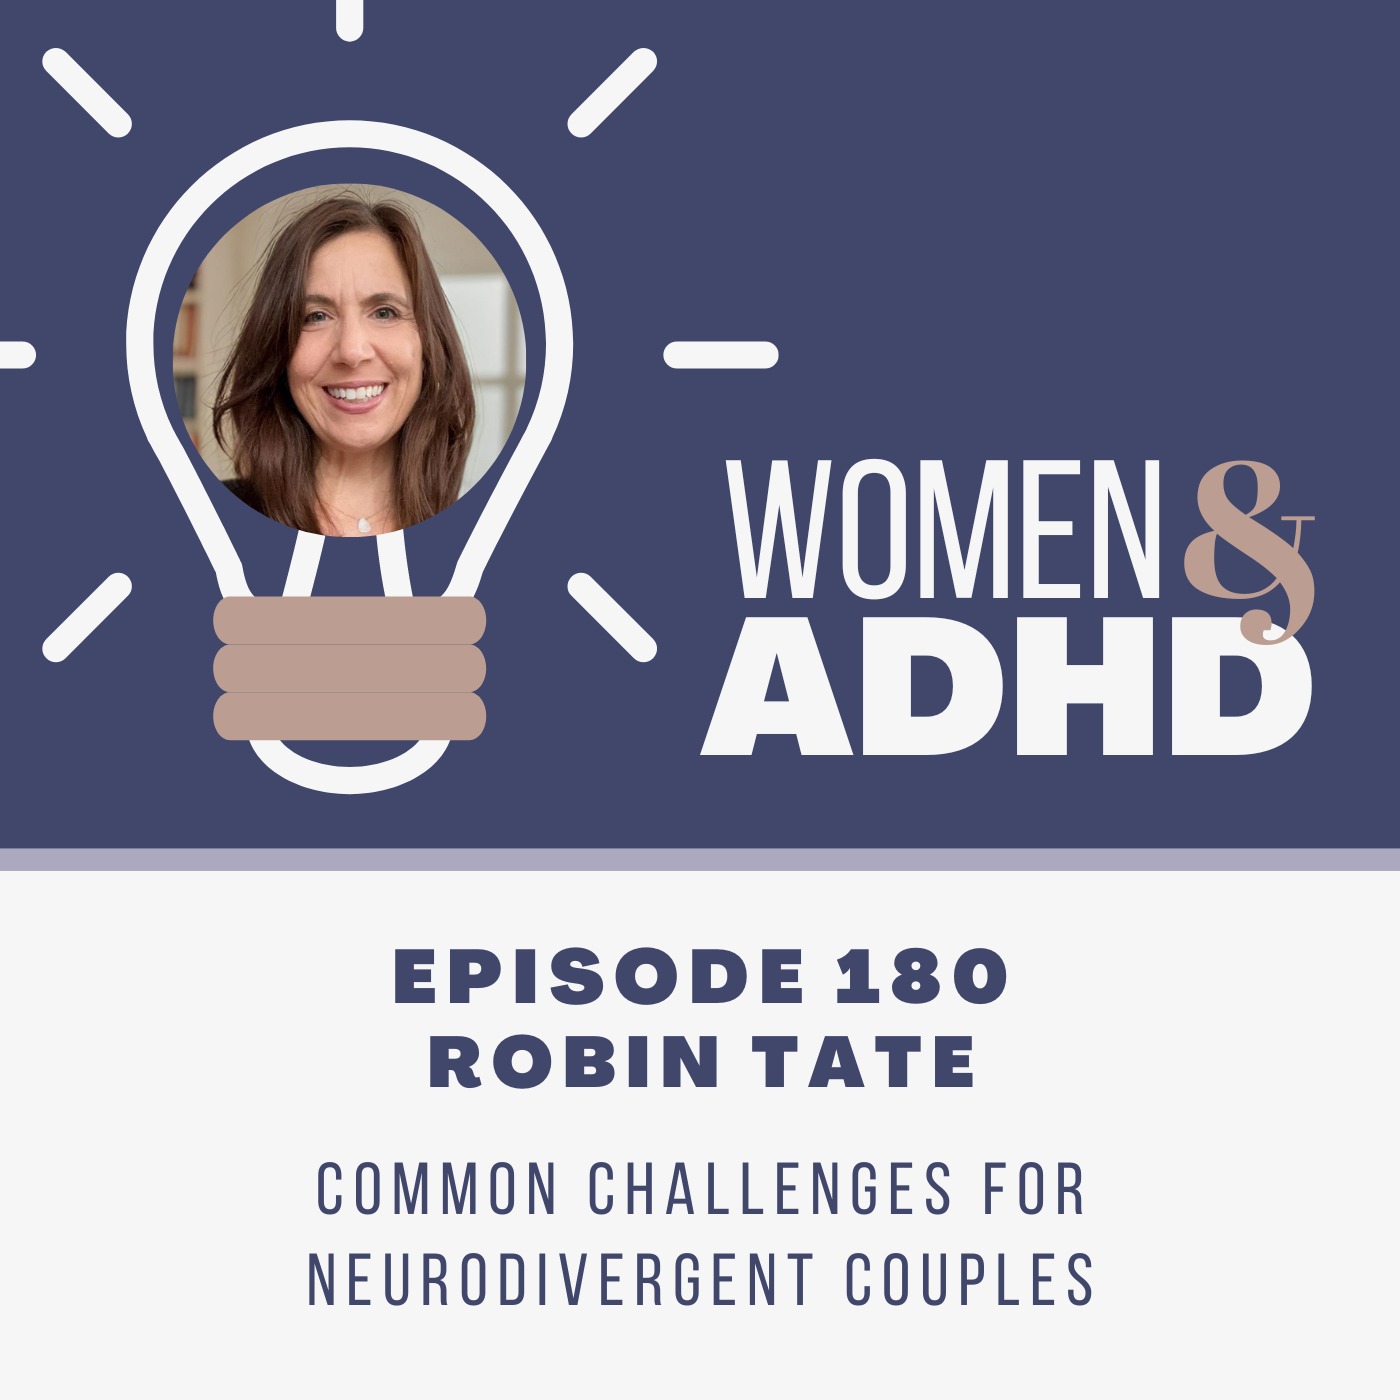 Robin Tate: Common challenges for neurodivergent couples